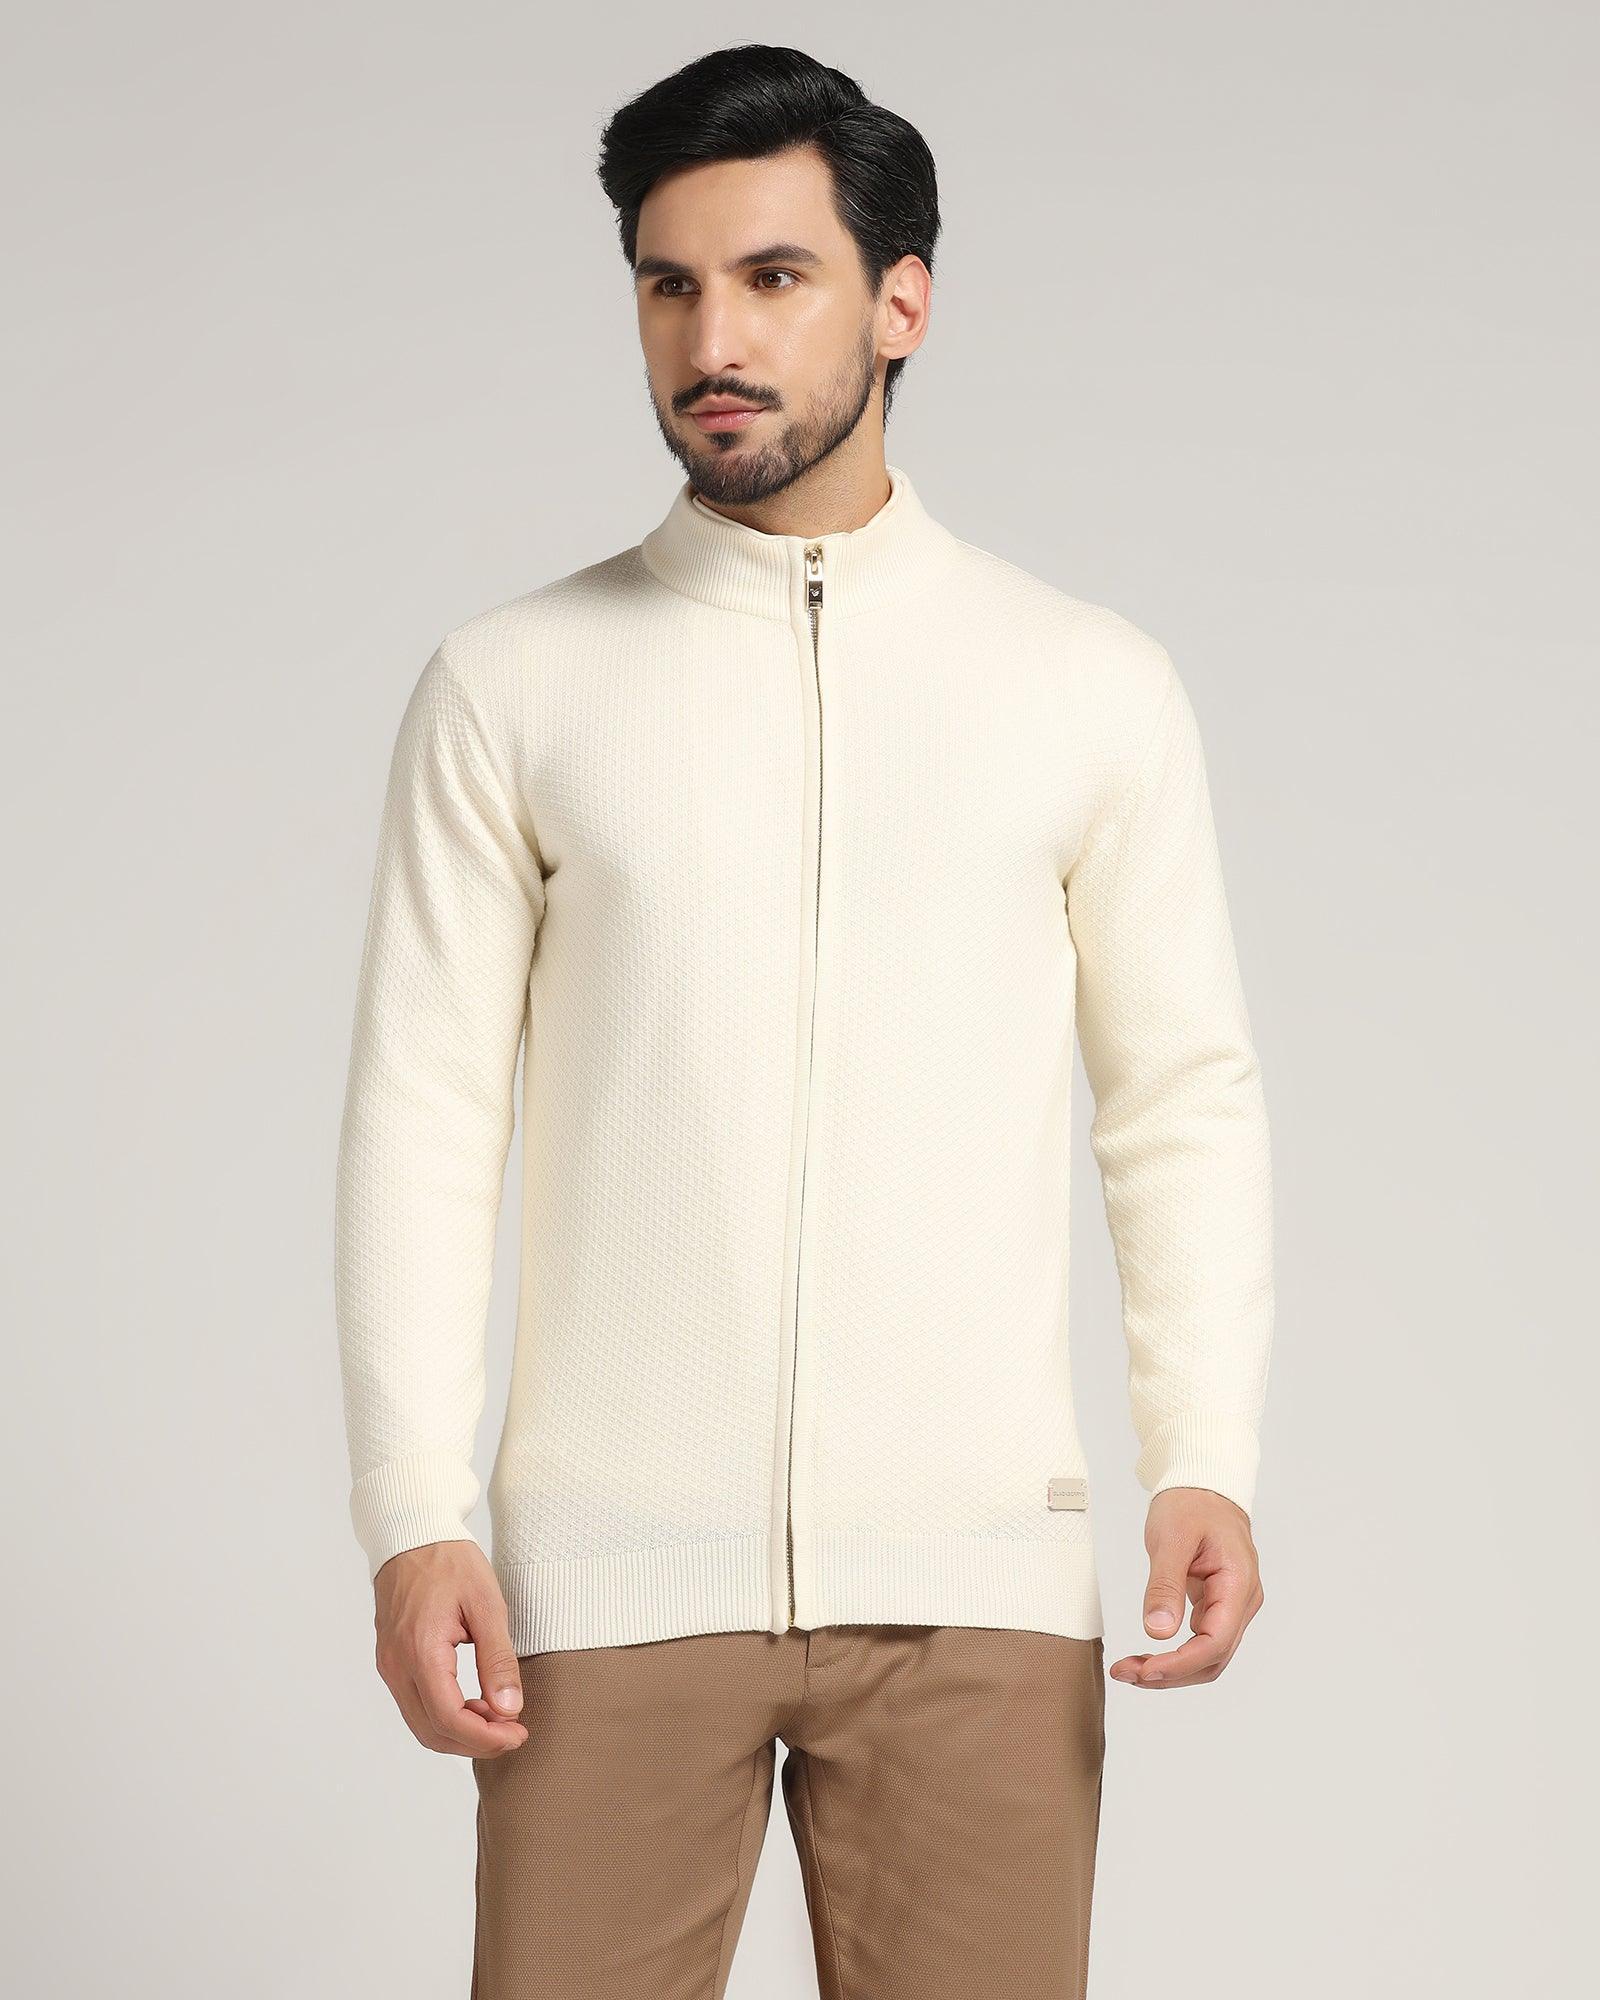 High Neck Off White Textured Sweater Jeremy